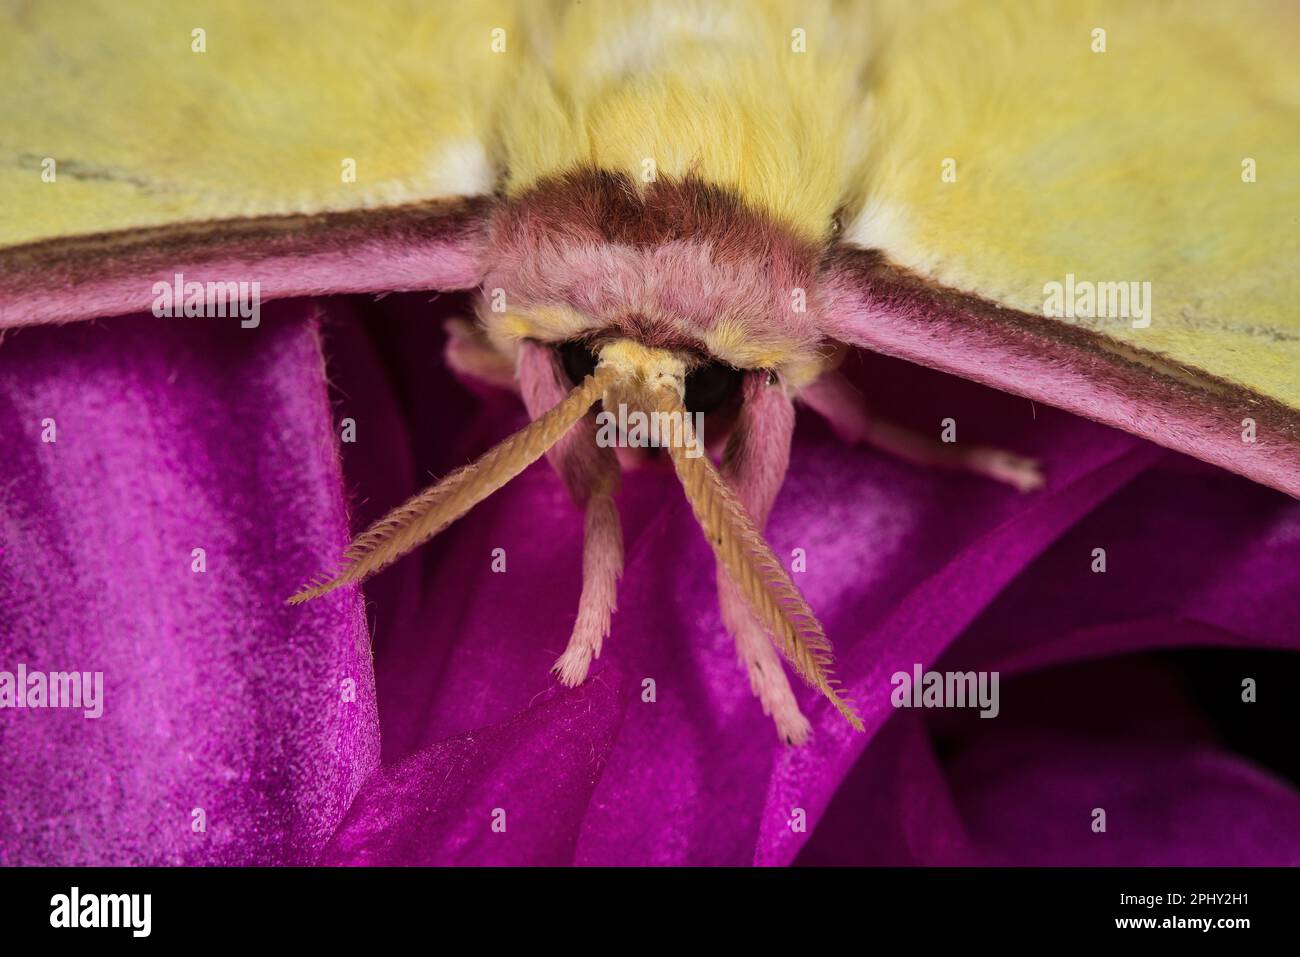 Chinese moon moth (Actias dubernardi), male with large antennae, front view Stock Photo